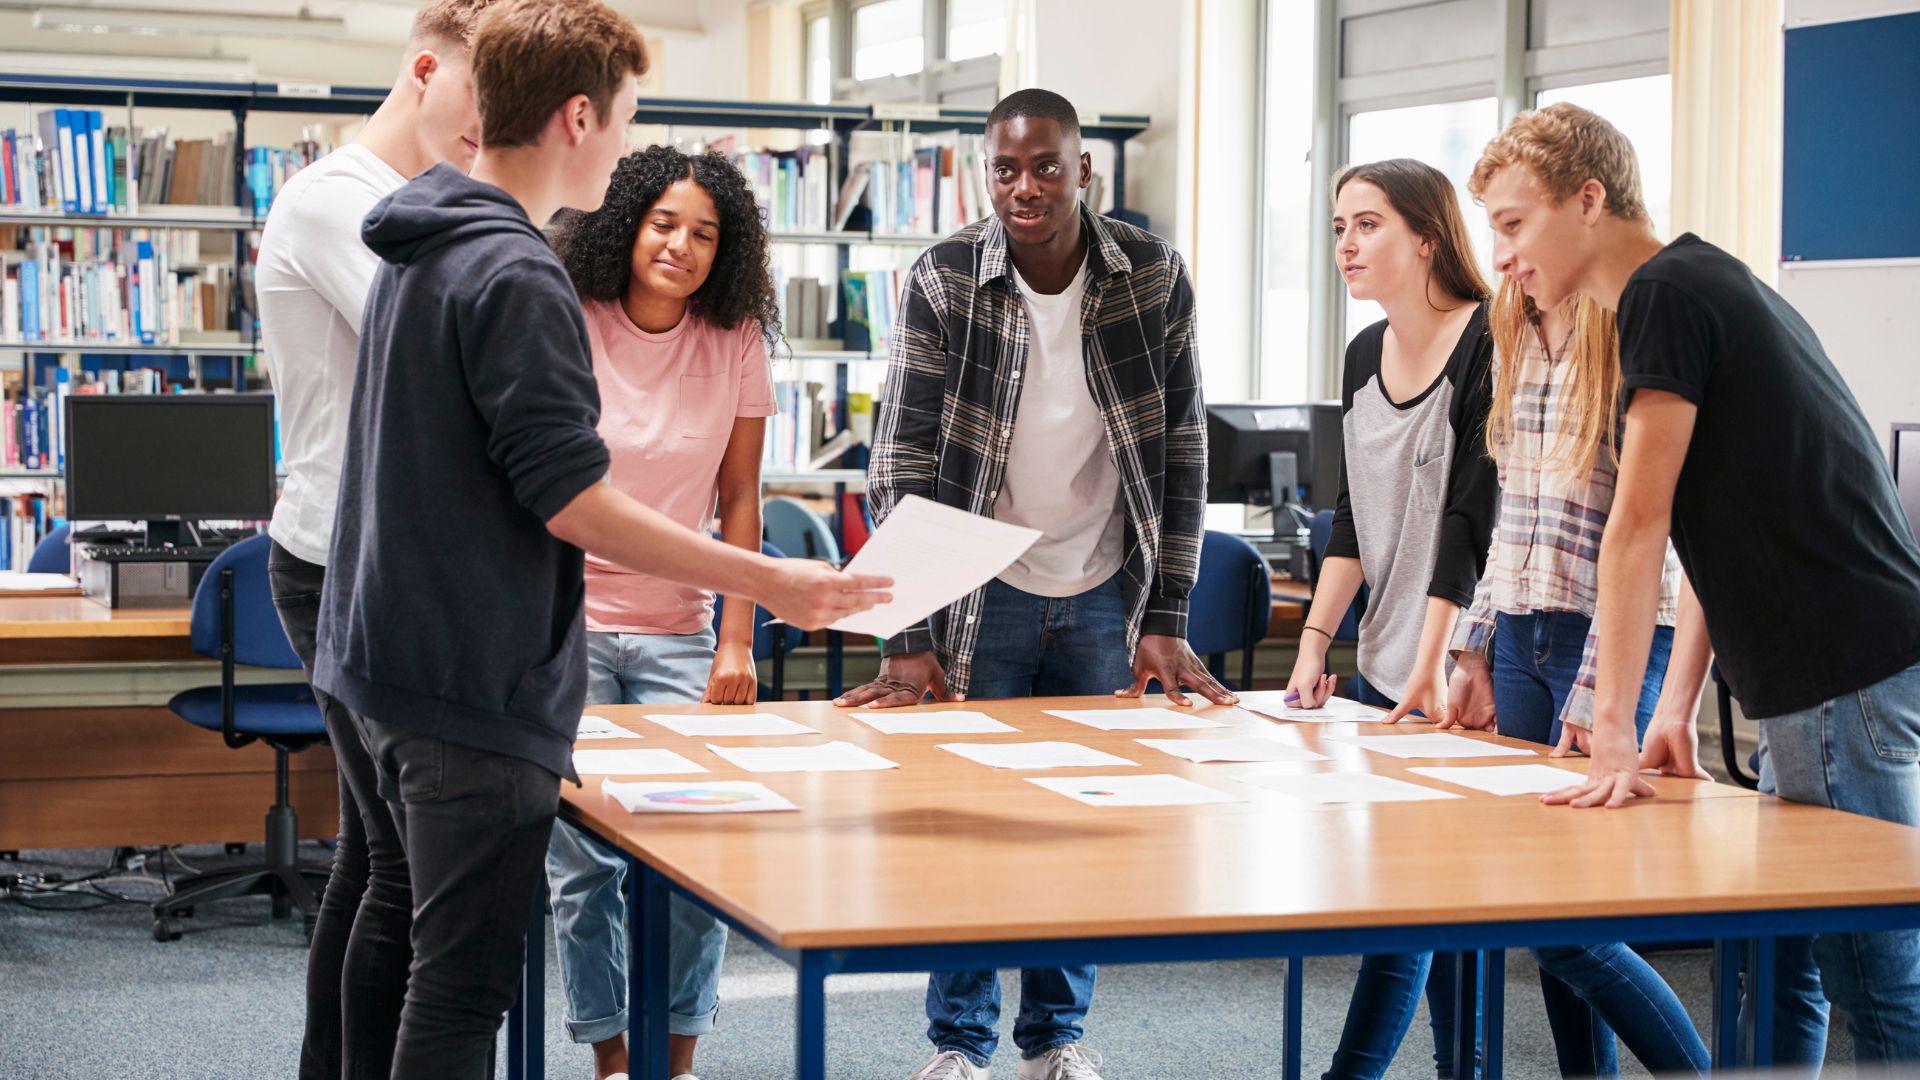 Stock image of students standing around a desk